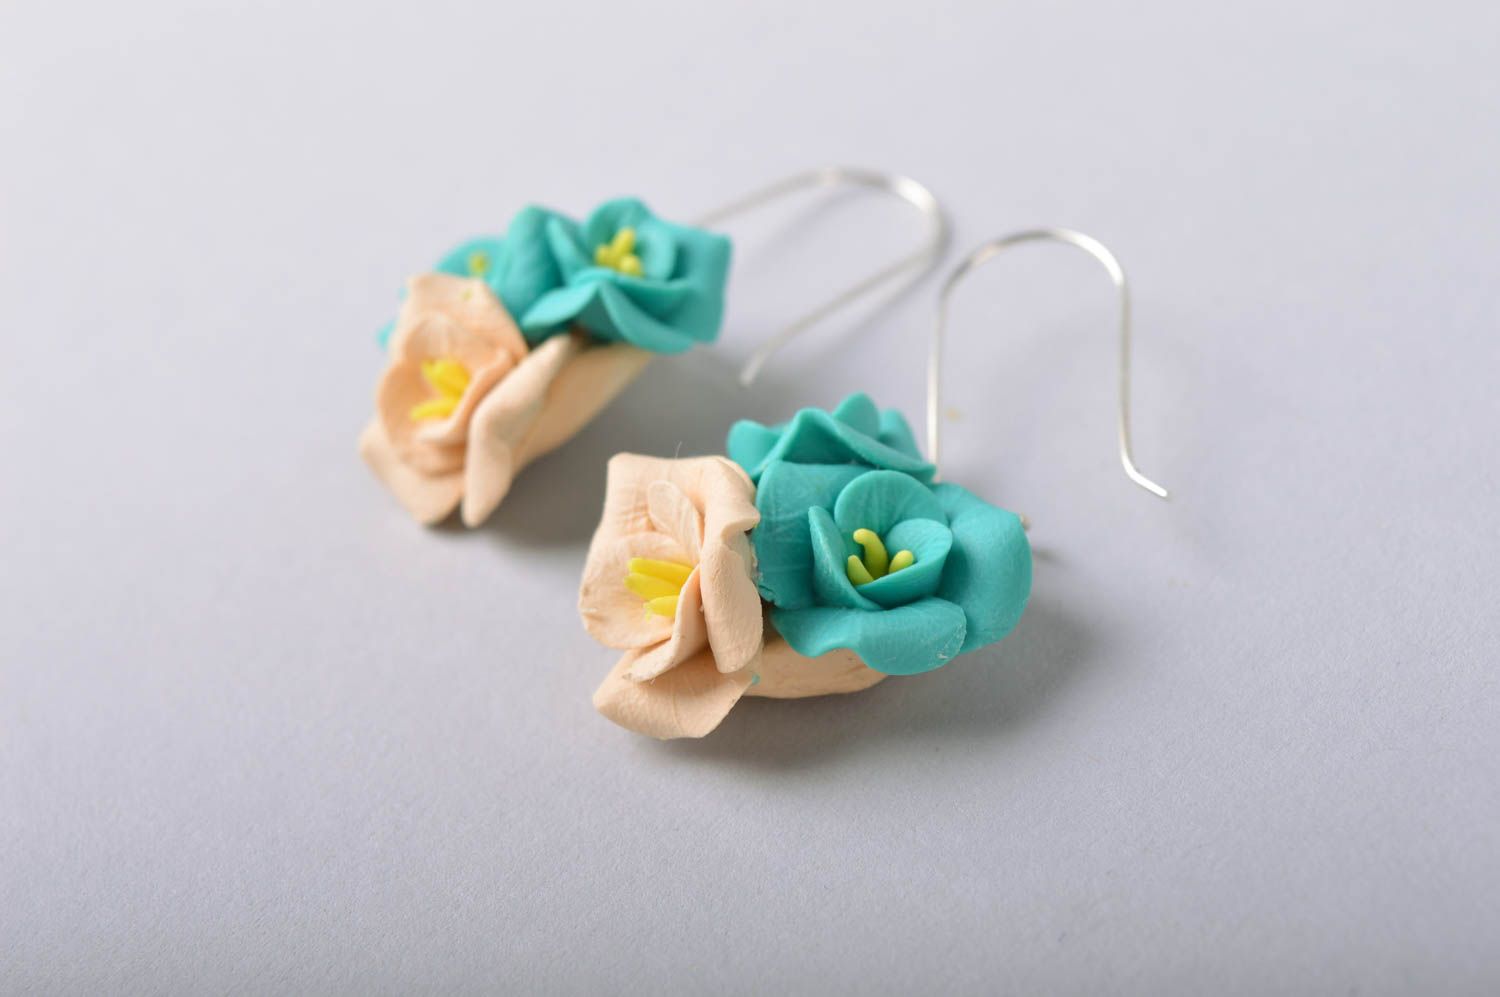 Handmade earrings with charms made of cold porcelain in pastel shades  photo 3